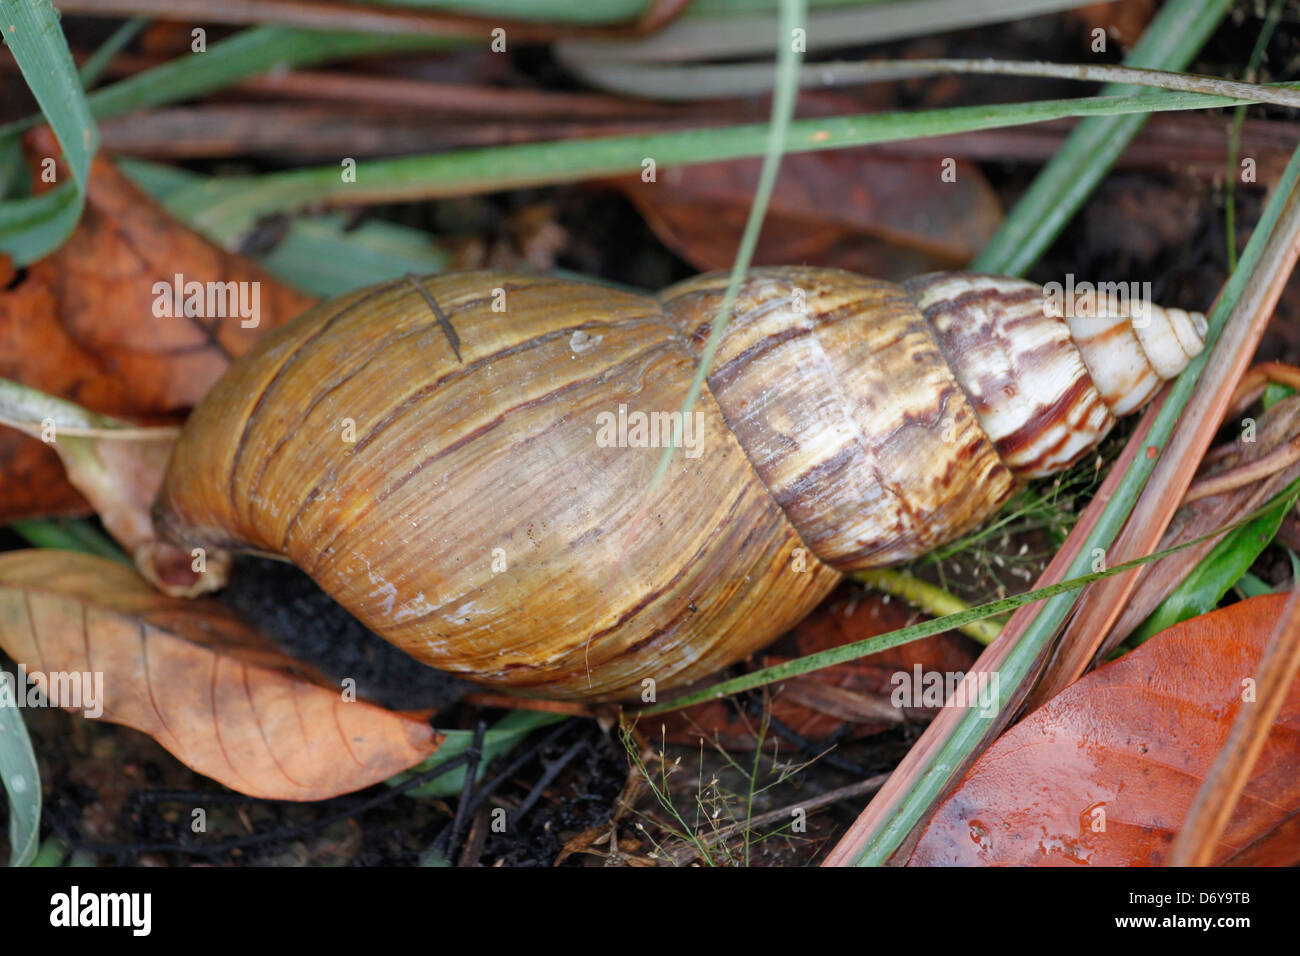 The Gastropod in The Vegetables Garden. Stock Photo